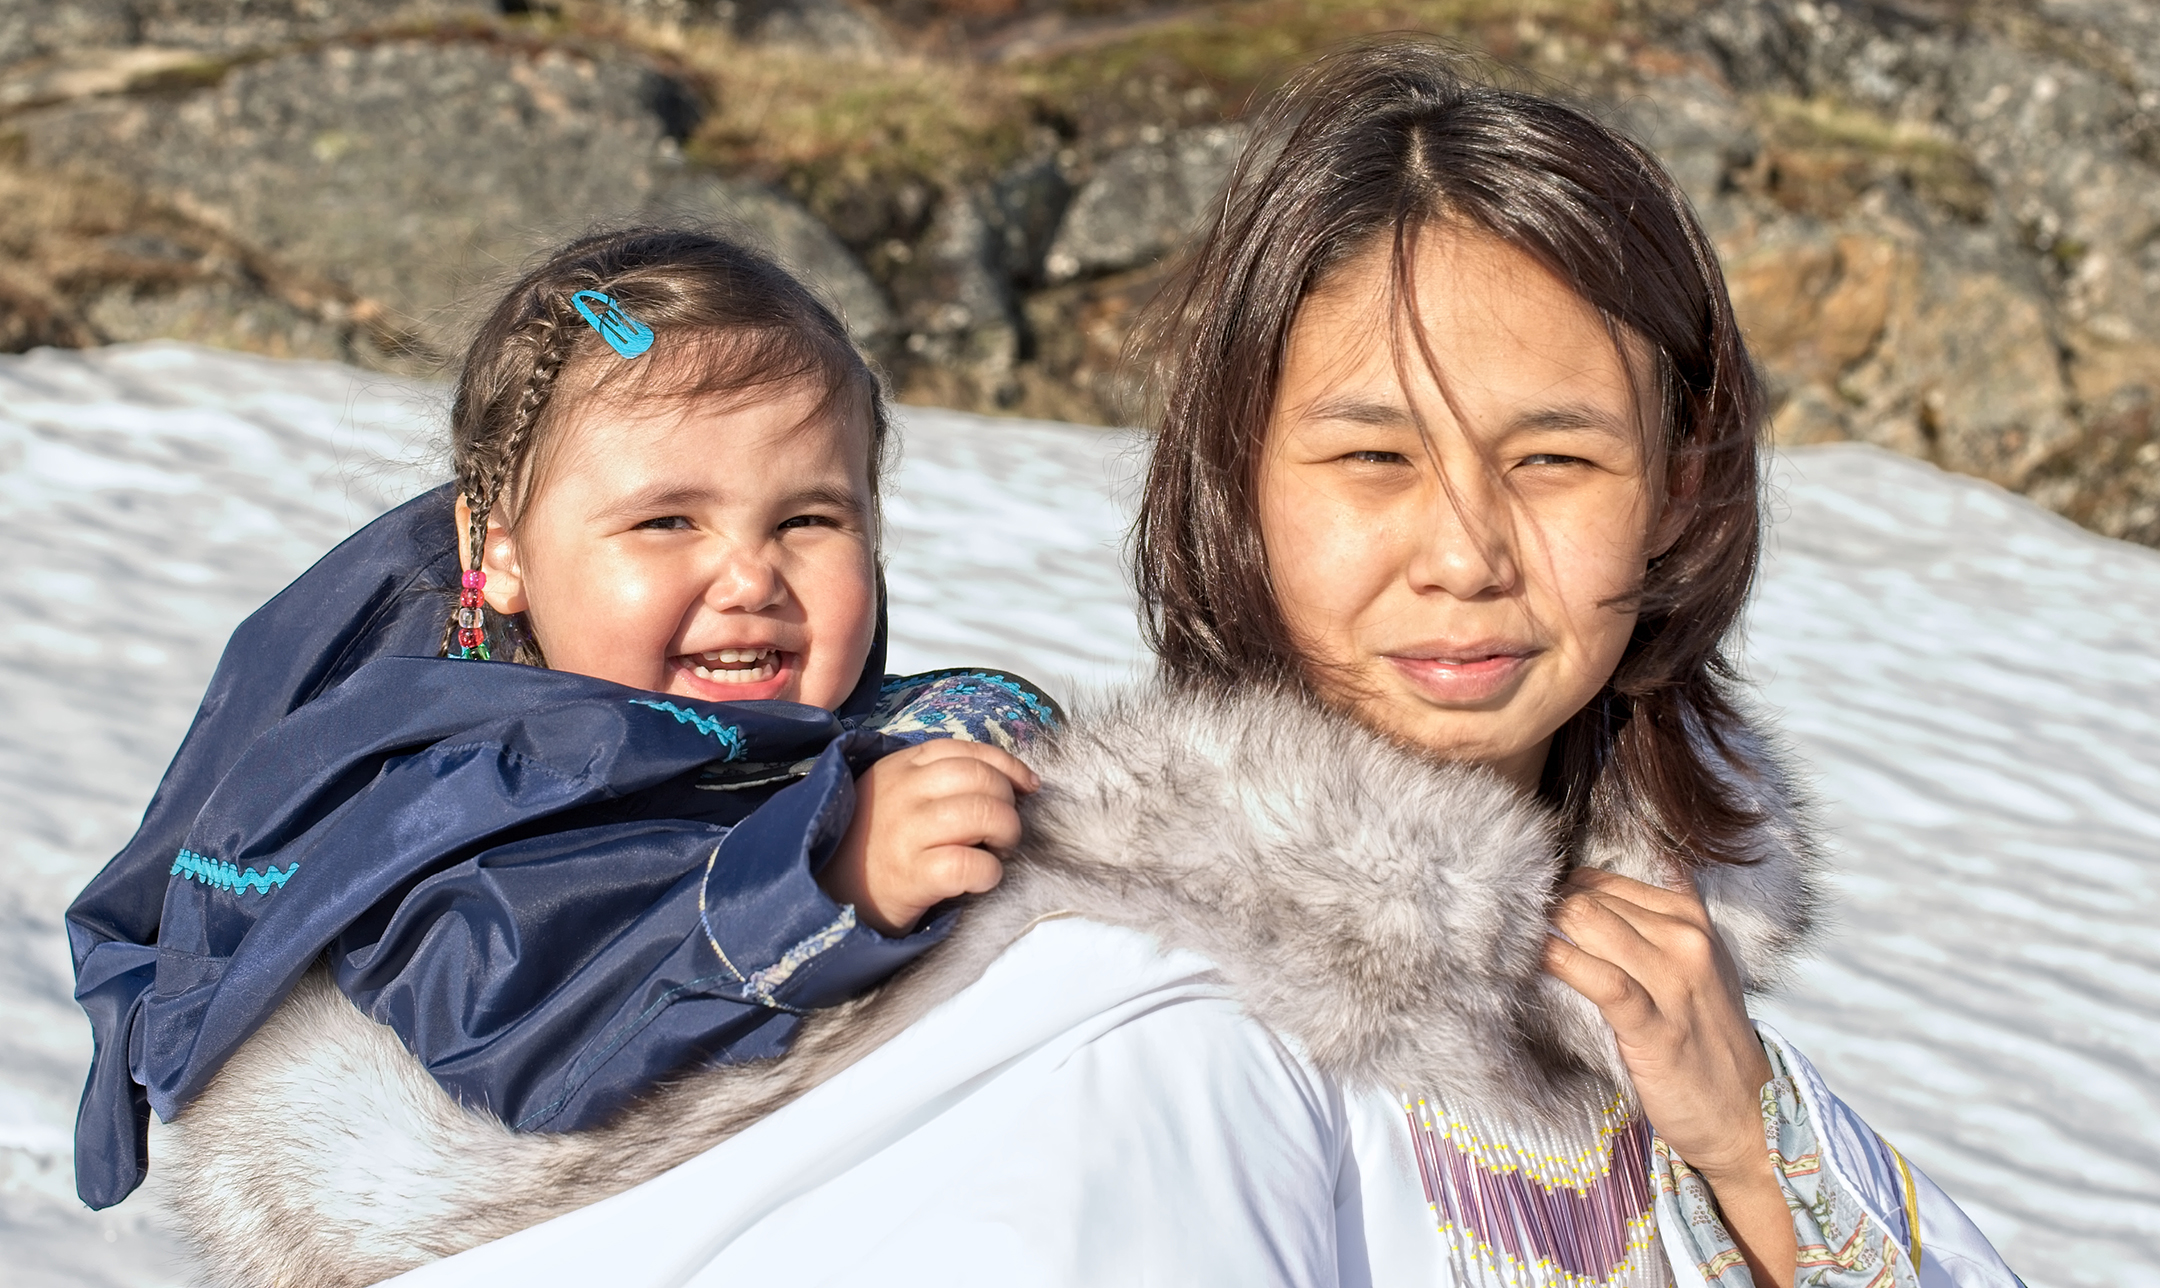 Toddler smiling while wearing traditional Inuit clothing and being carried on its mom's back